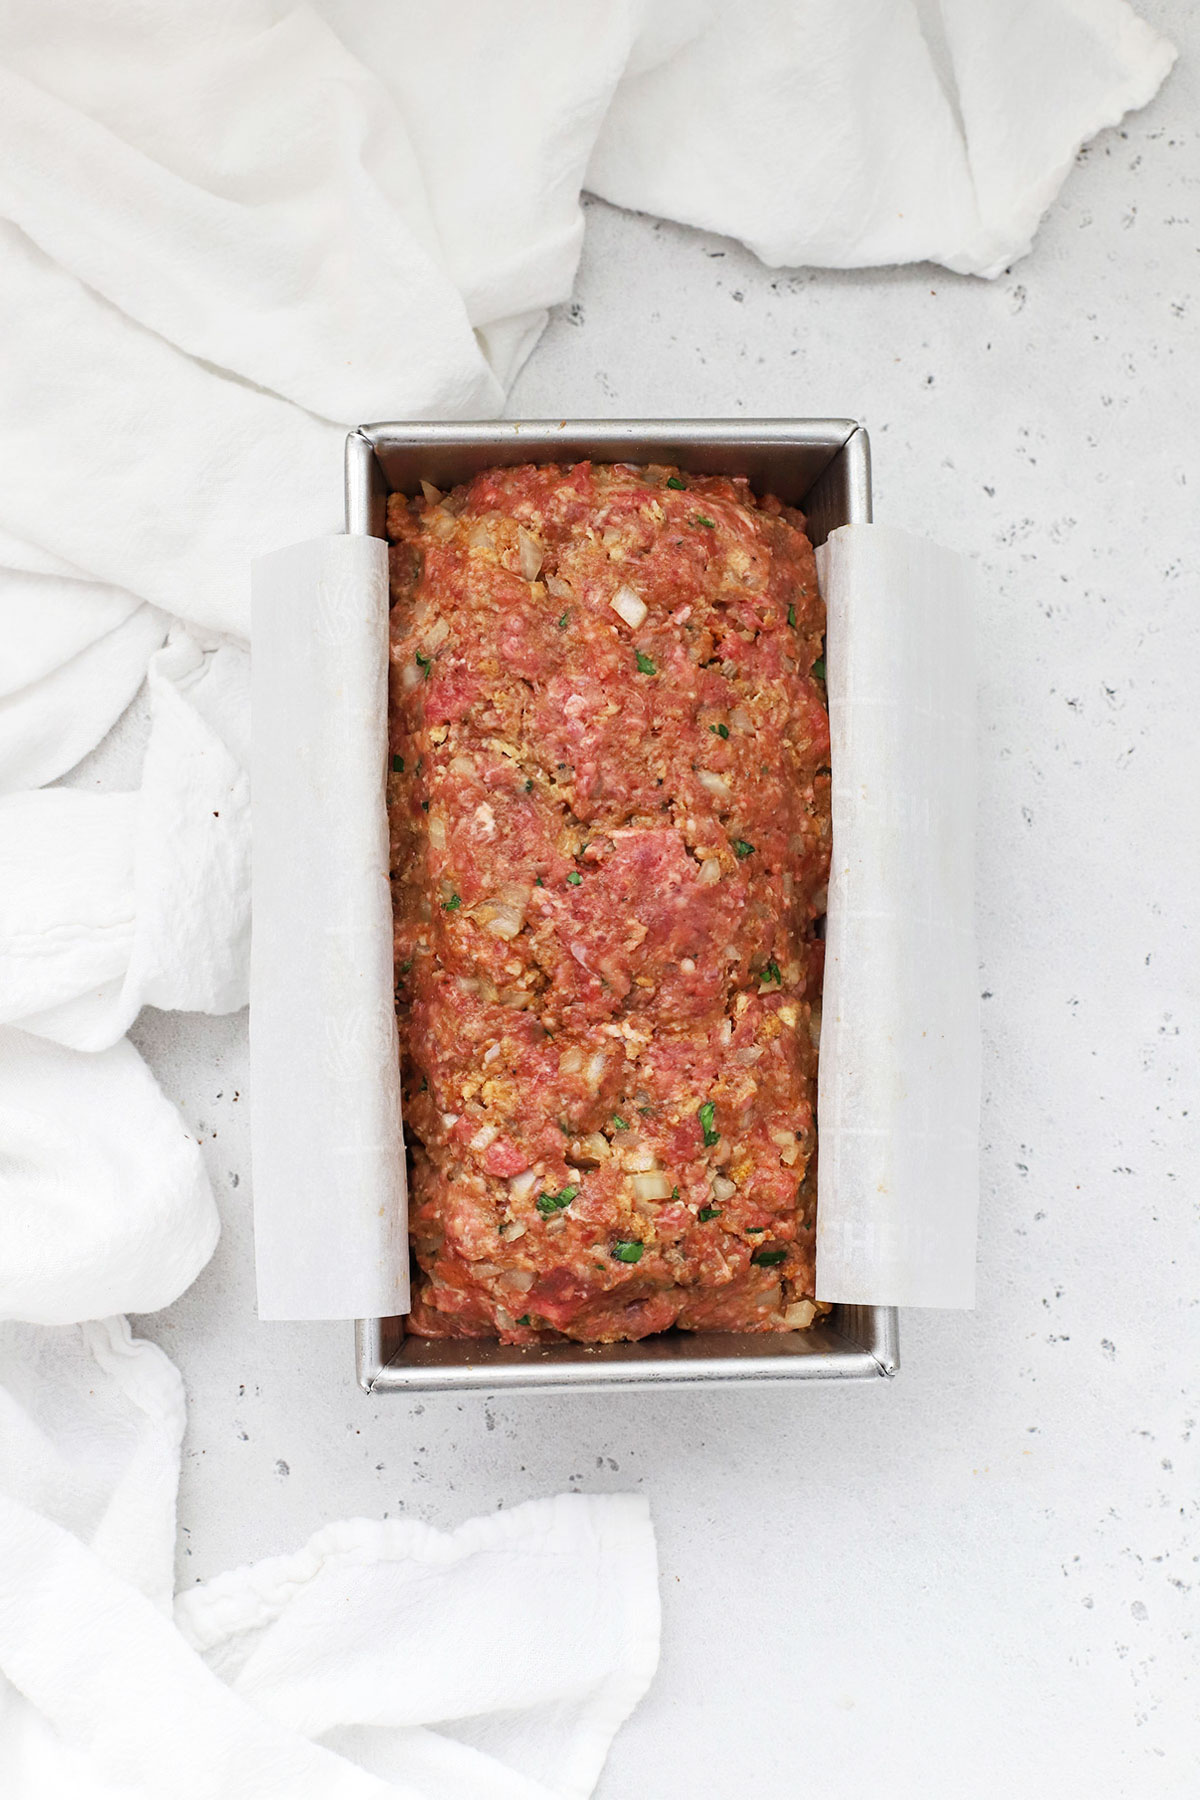 gluten-free meatloaf ready to go into the oven